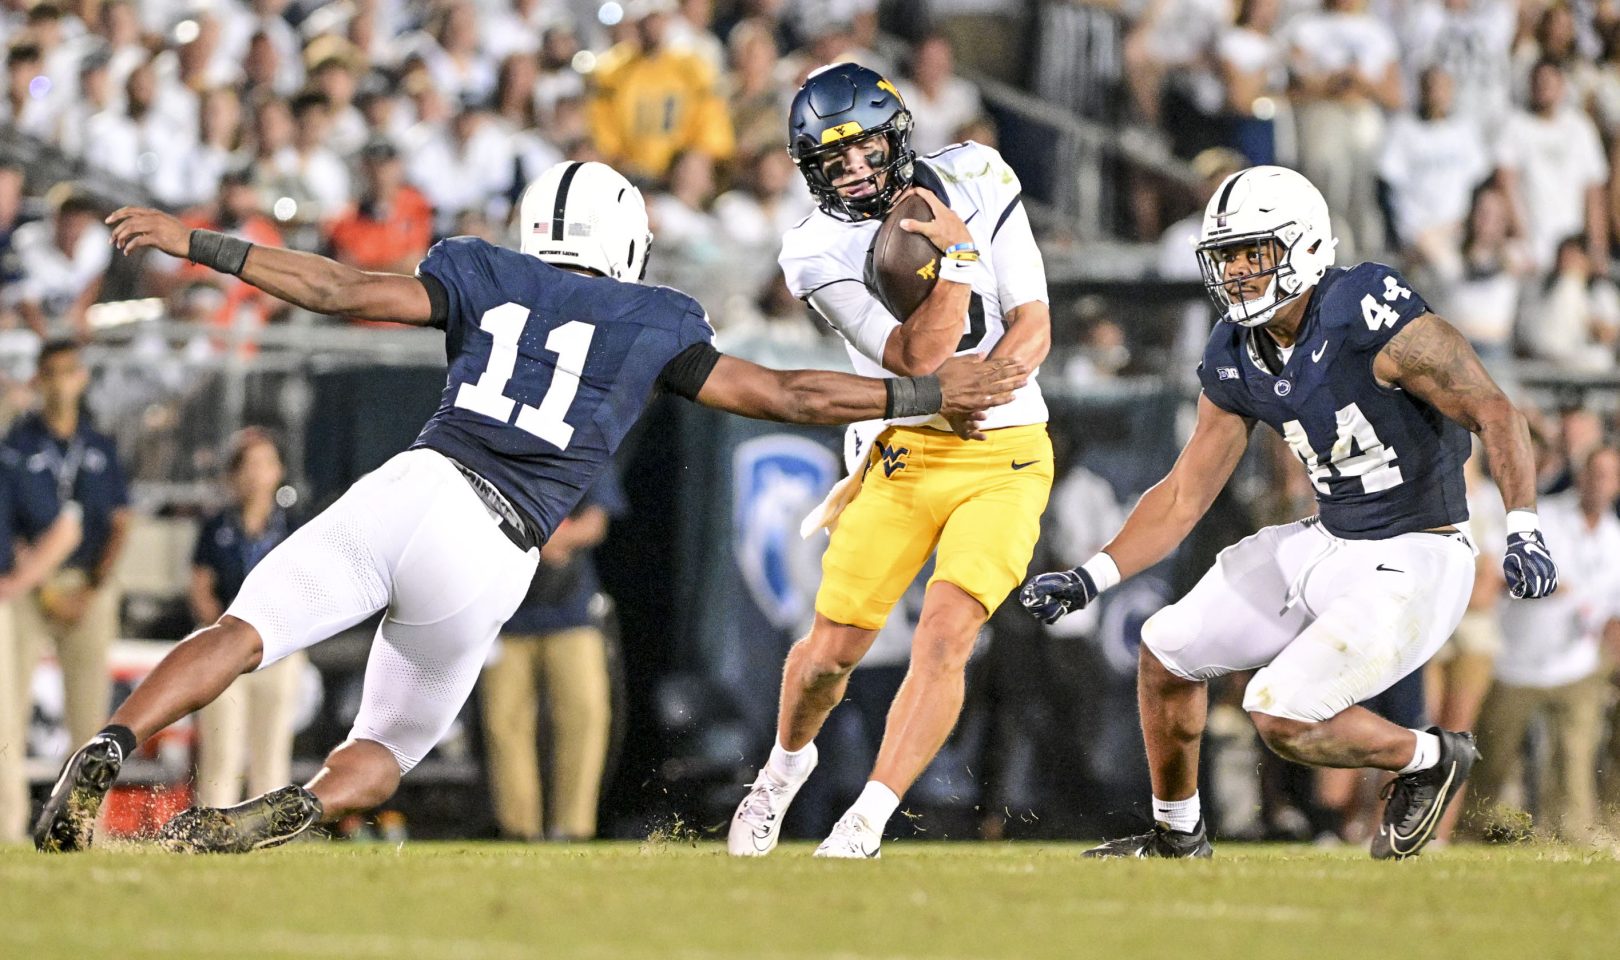 Mountaineers focused on transition from tough opener to FCS opponent